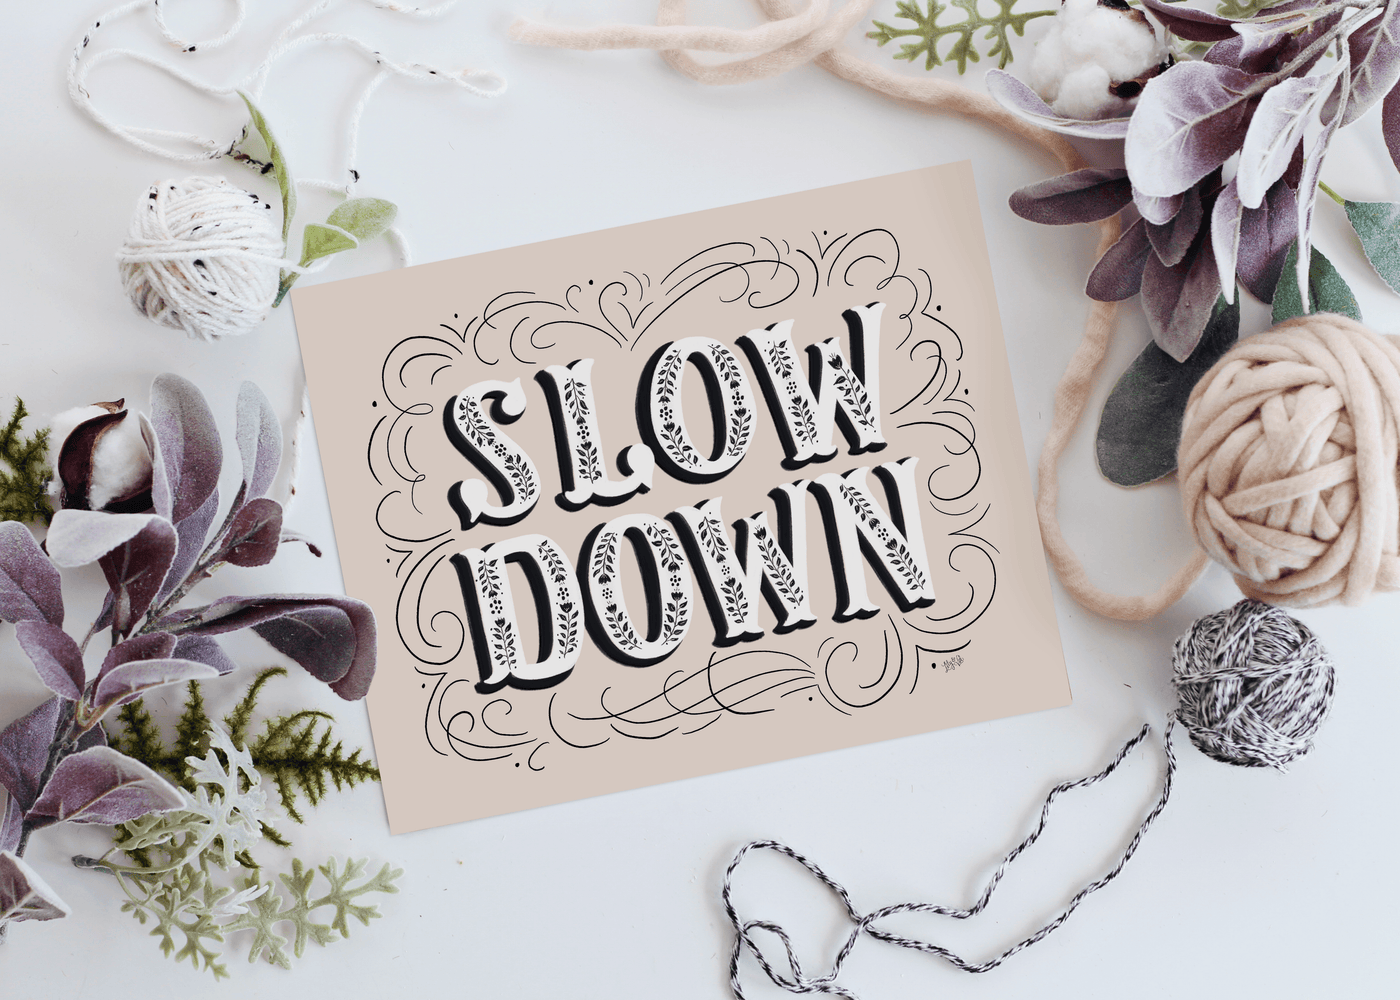 Slow Down - Print - Lily & Val